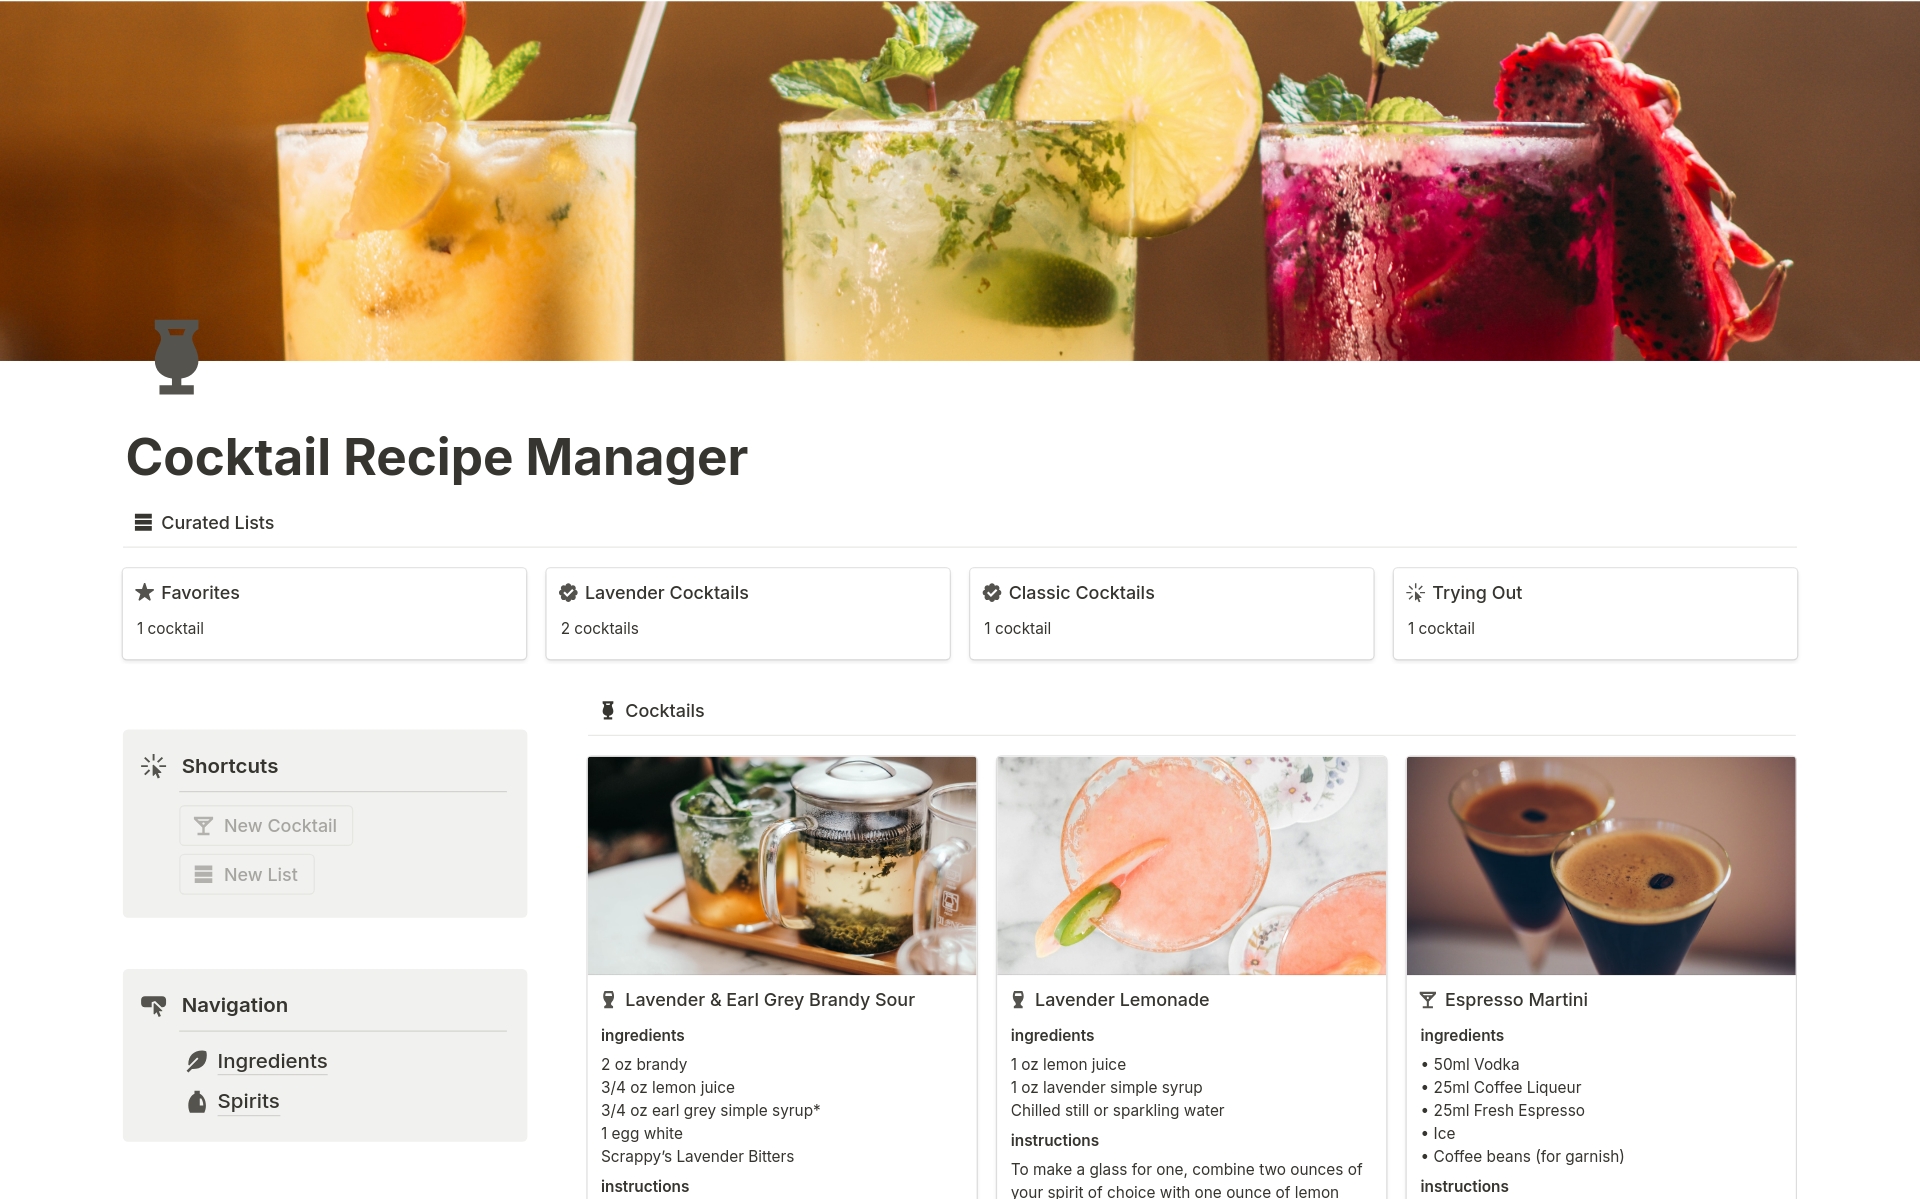 Manage all your cocktail recipes in one database.